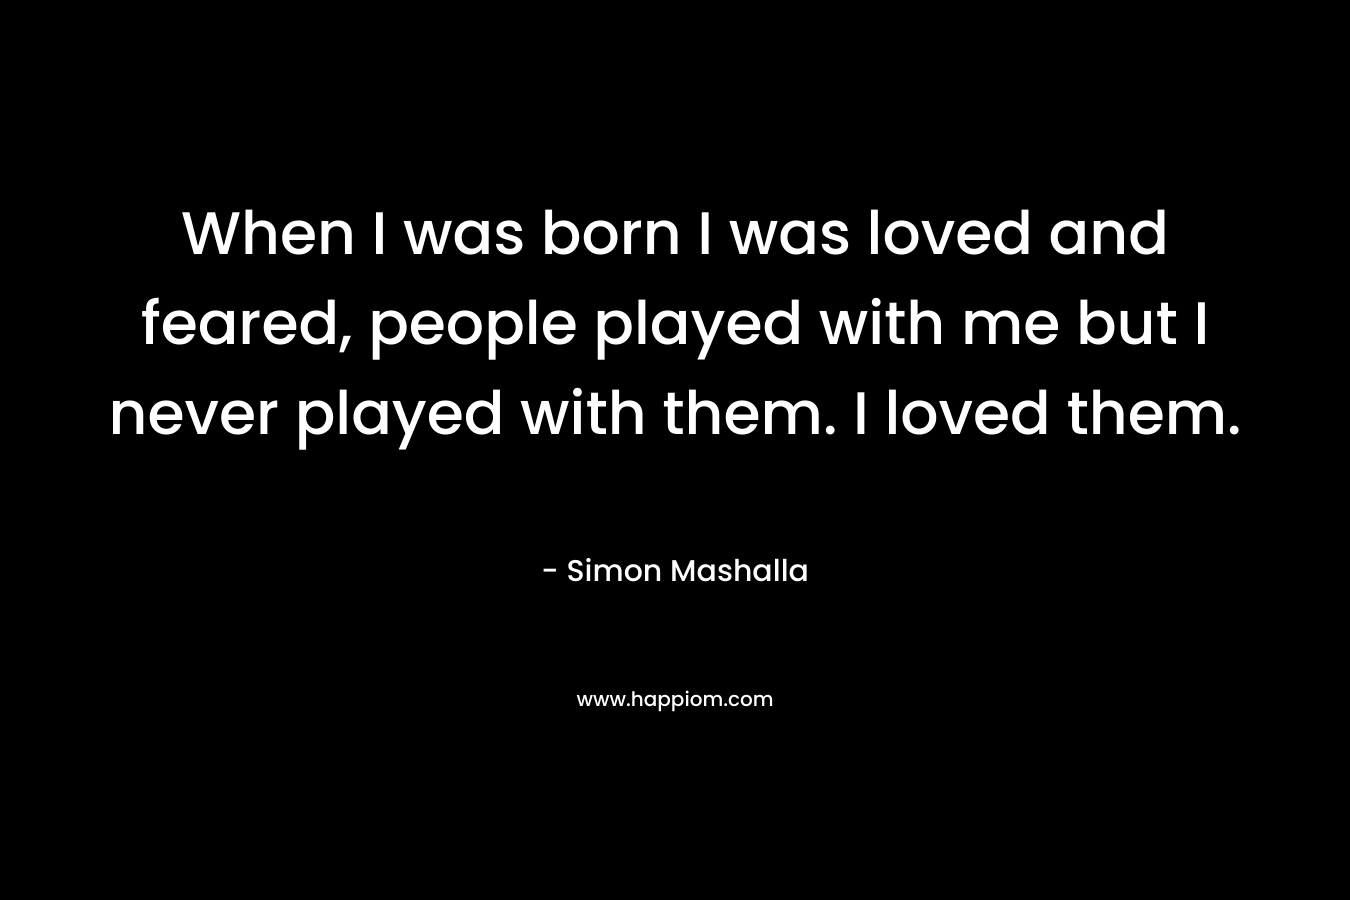 When I was born I was loved and feared, people played with me but I never played with them. I loved them. – Simon Mashalla